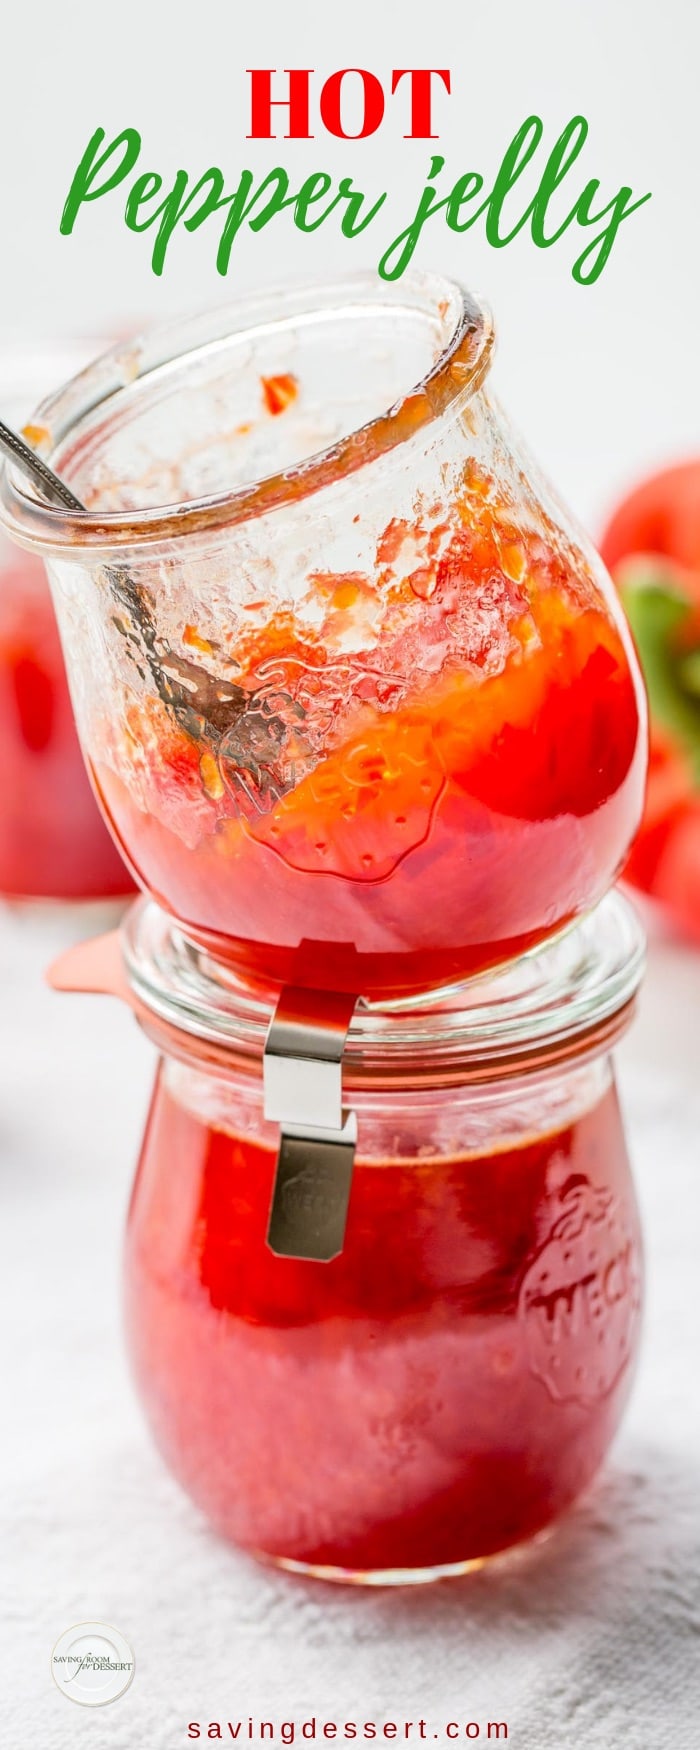 Hot Pepper Jelly ~ spicy, hot red cherry peppers and sweet red bell peppers combine in this easy and delicious jelly ... perfect for the season! #savingroomfordessert #hotpepperjelly #appetizer #jelly #redpepper